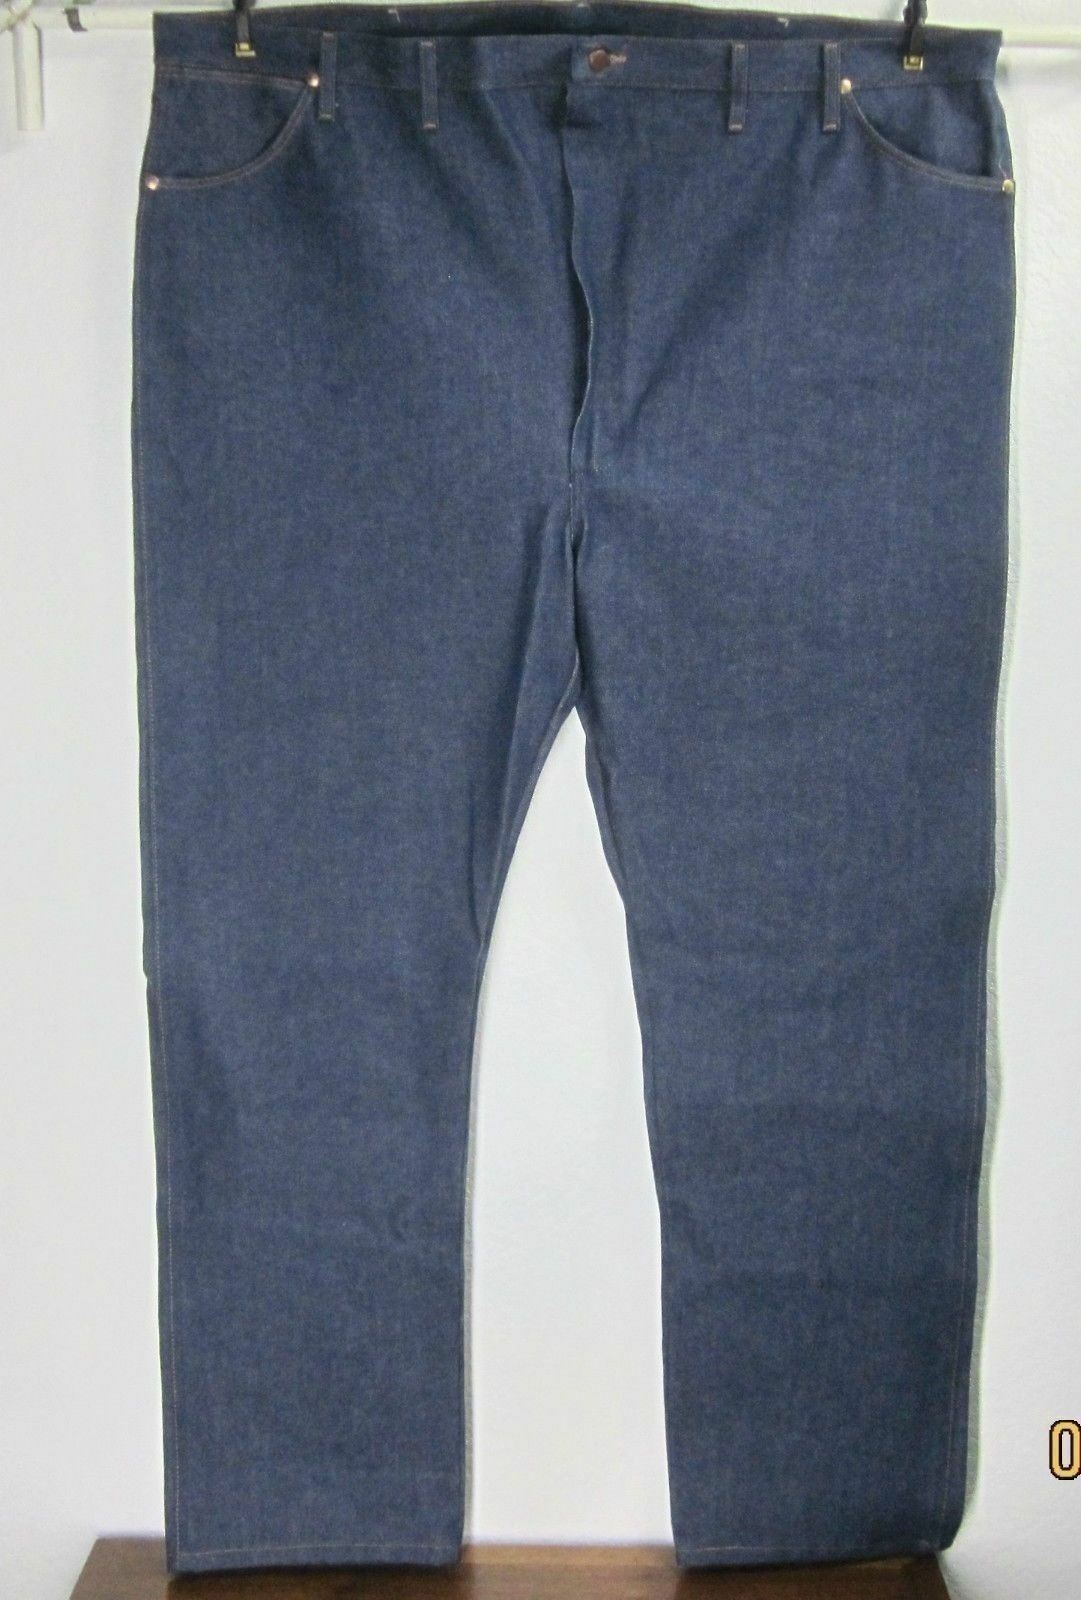 WRANGLER NWOT RIGID UNWASHED BLUE JEANS W52 L34 100% Cotton Fits Over Boot Easy - $49.50